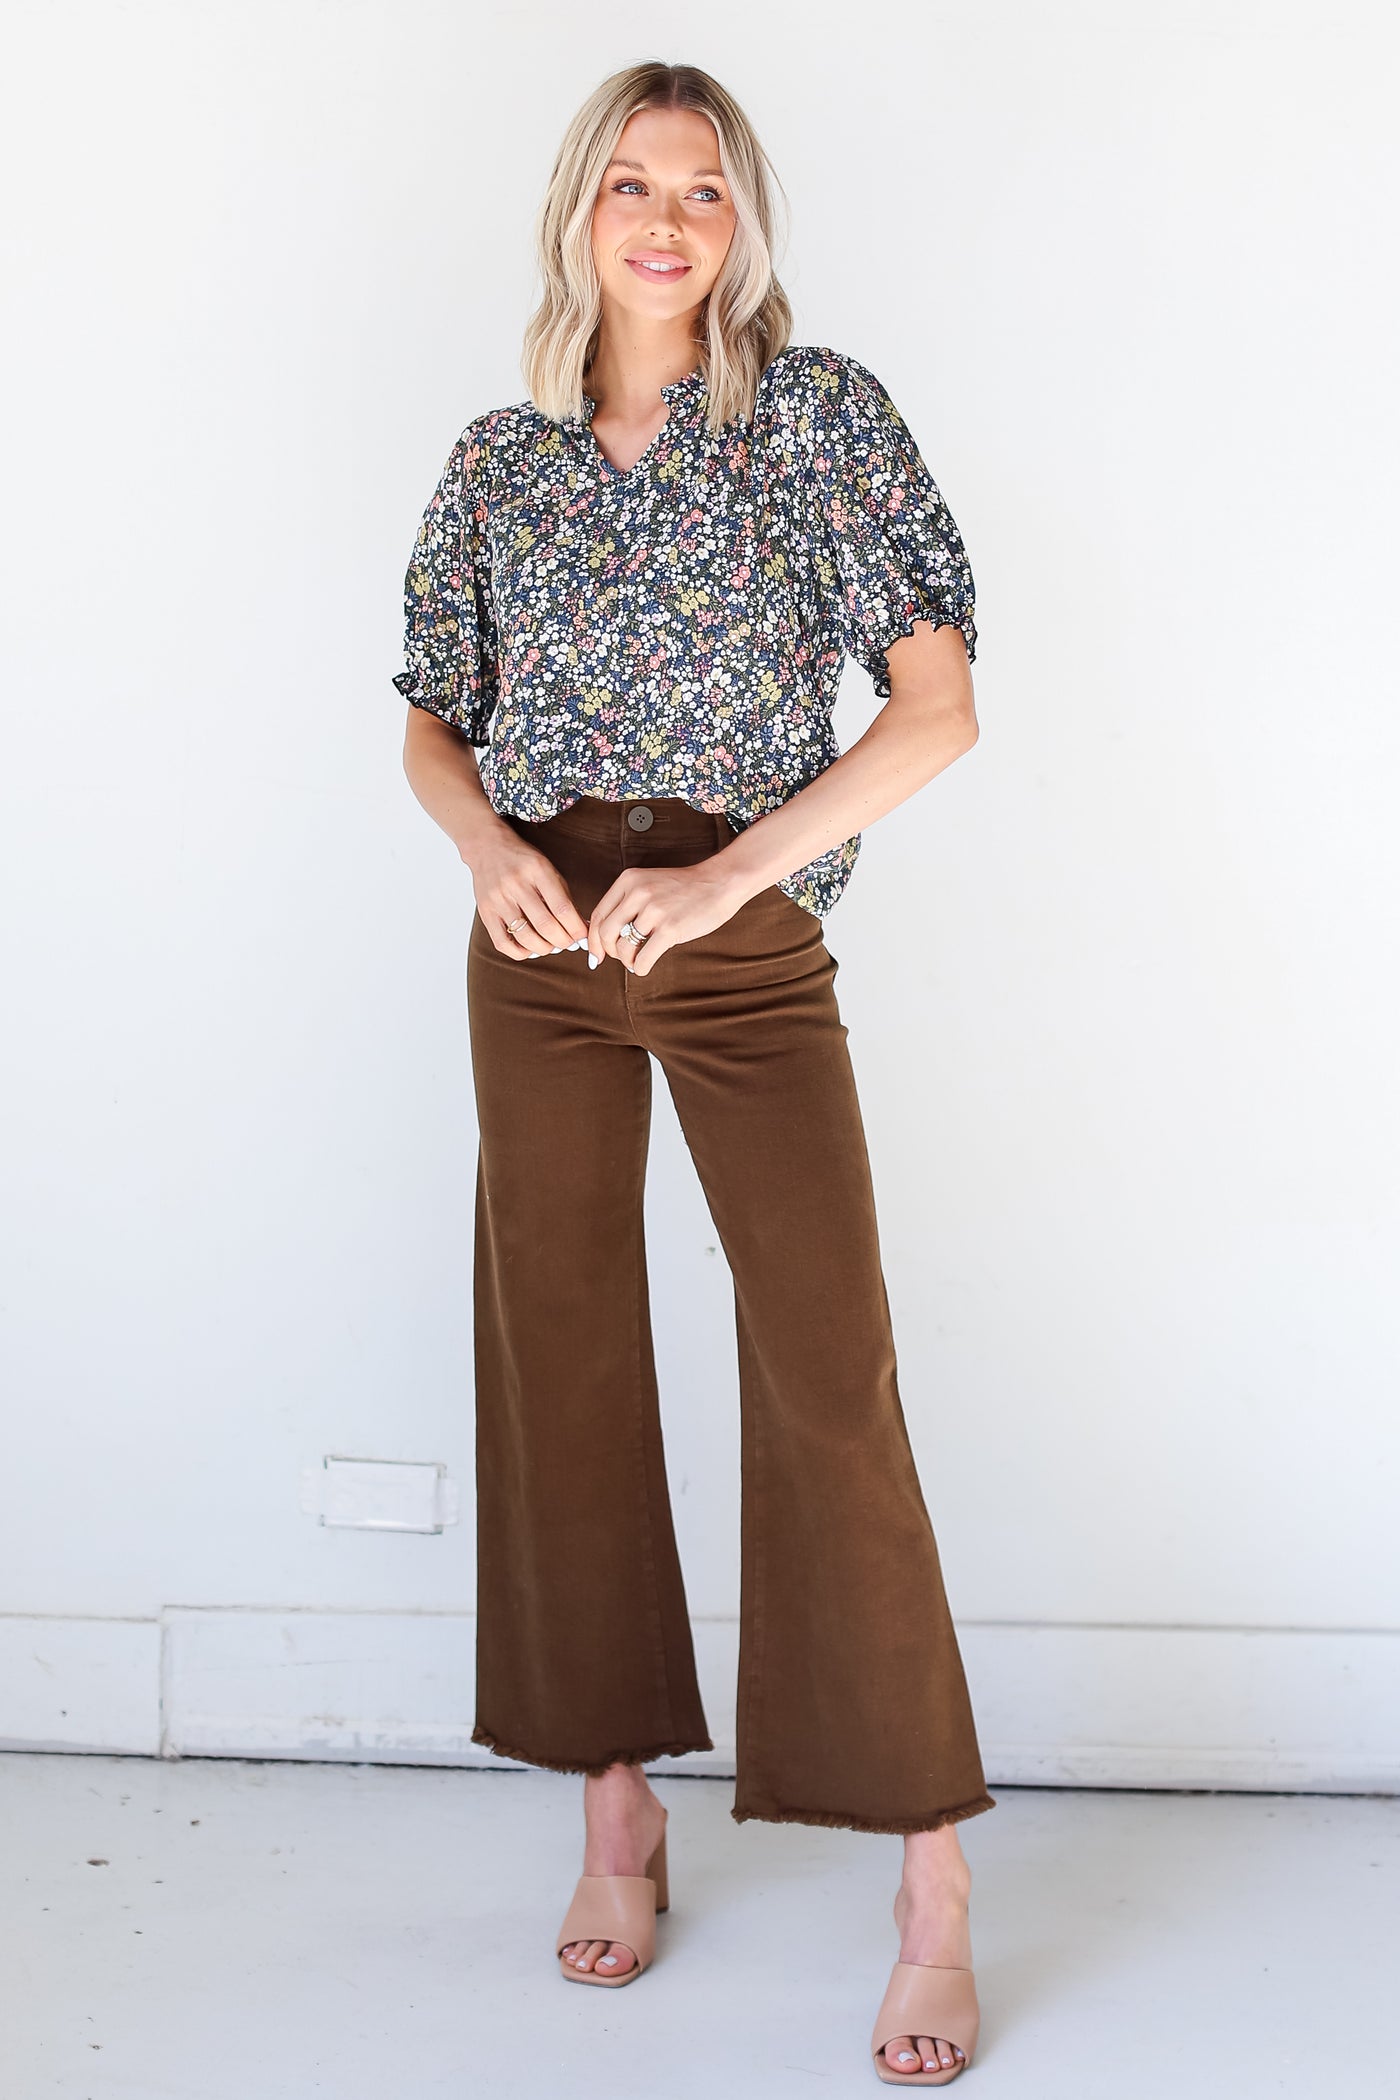 cute navy blue Floral Blouse with brown pants